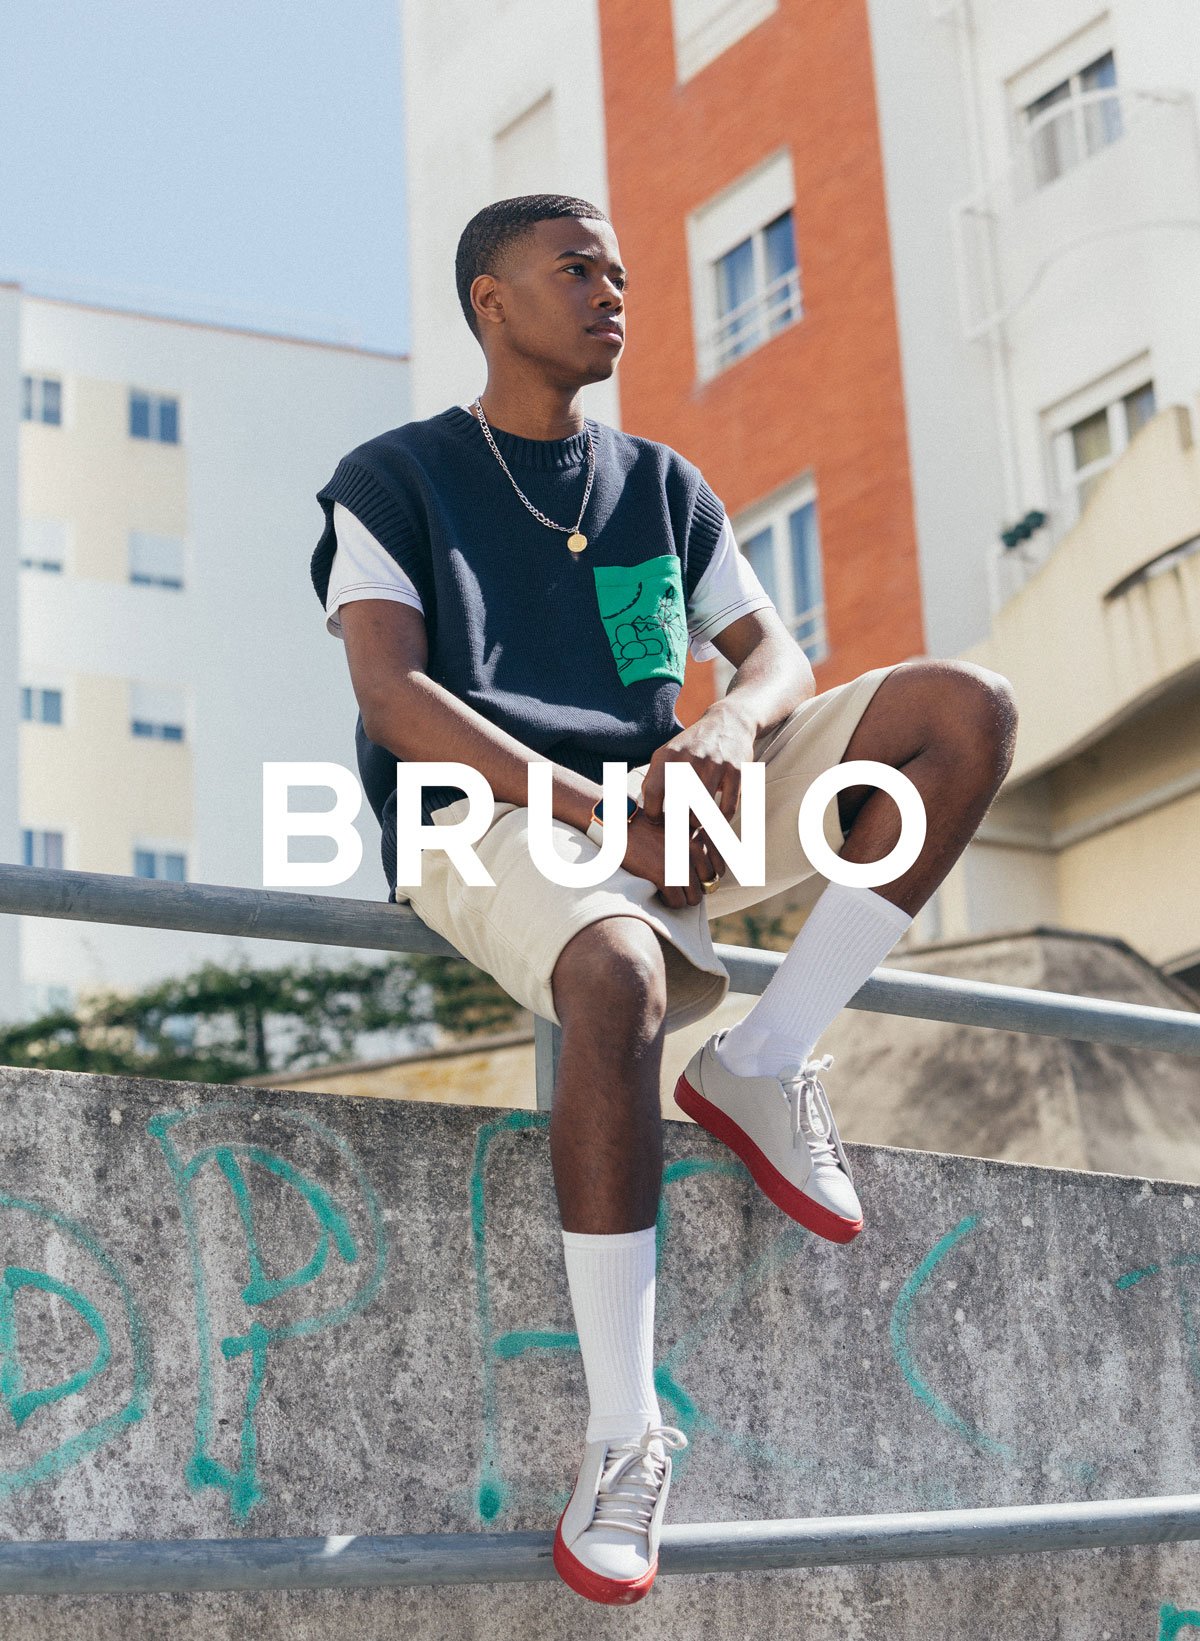 Bruno sitting on a hadrail, wearing Diverge sneakers, promoting social impact and custom shoes throught the imagine project. 